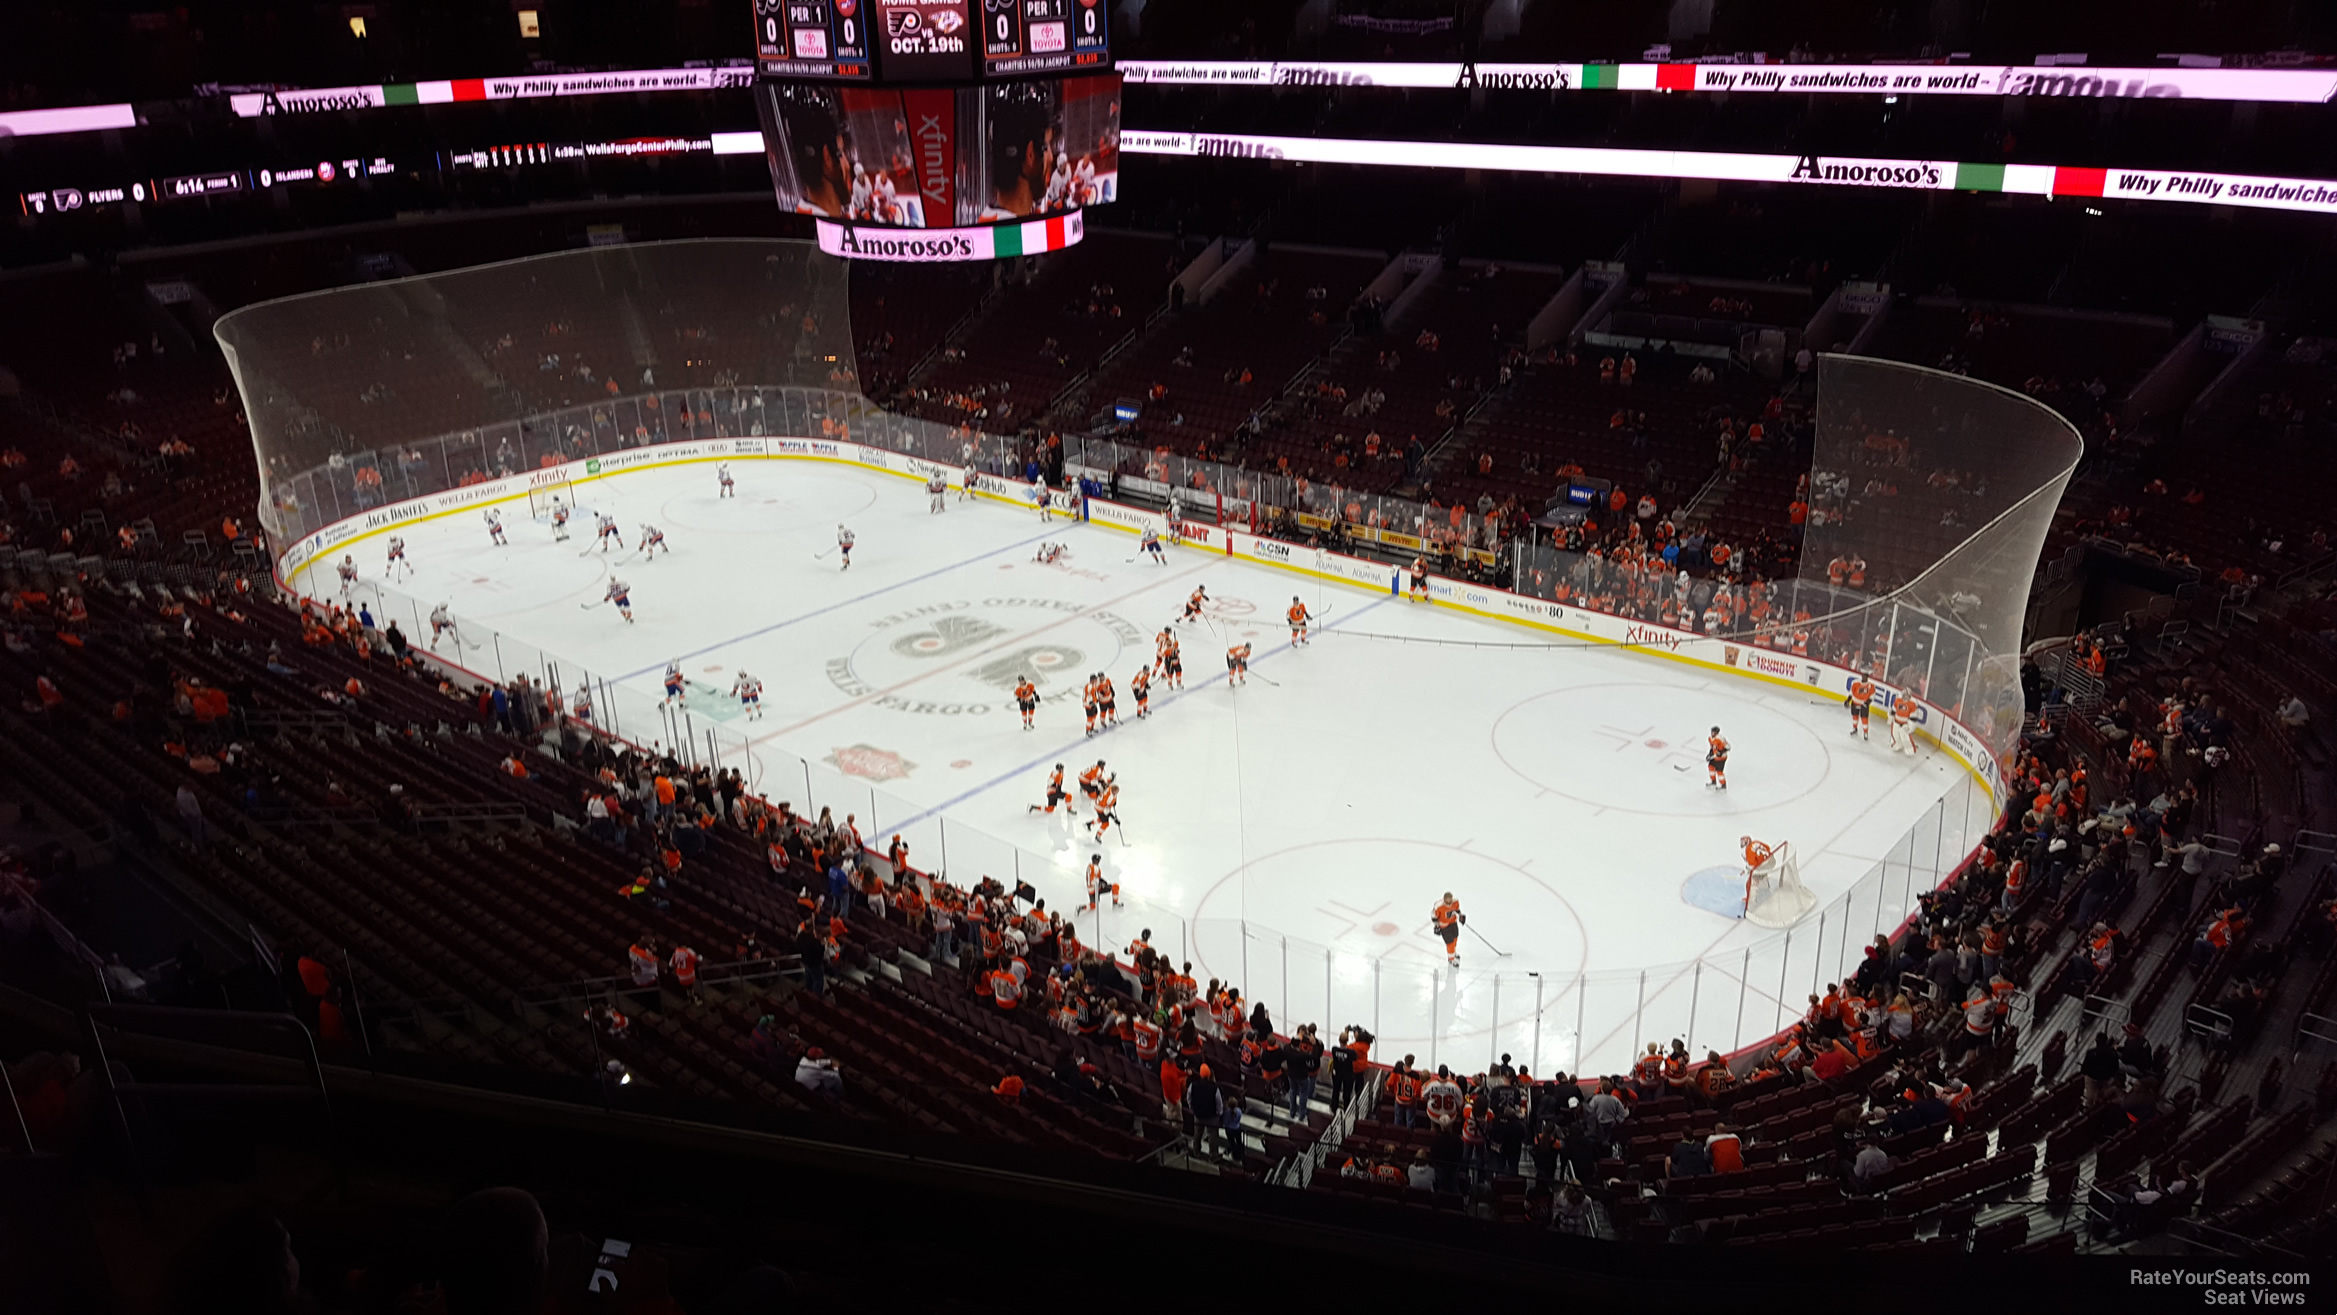 section 216a, row 8 seat view  for hockey - wells fargo center